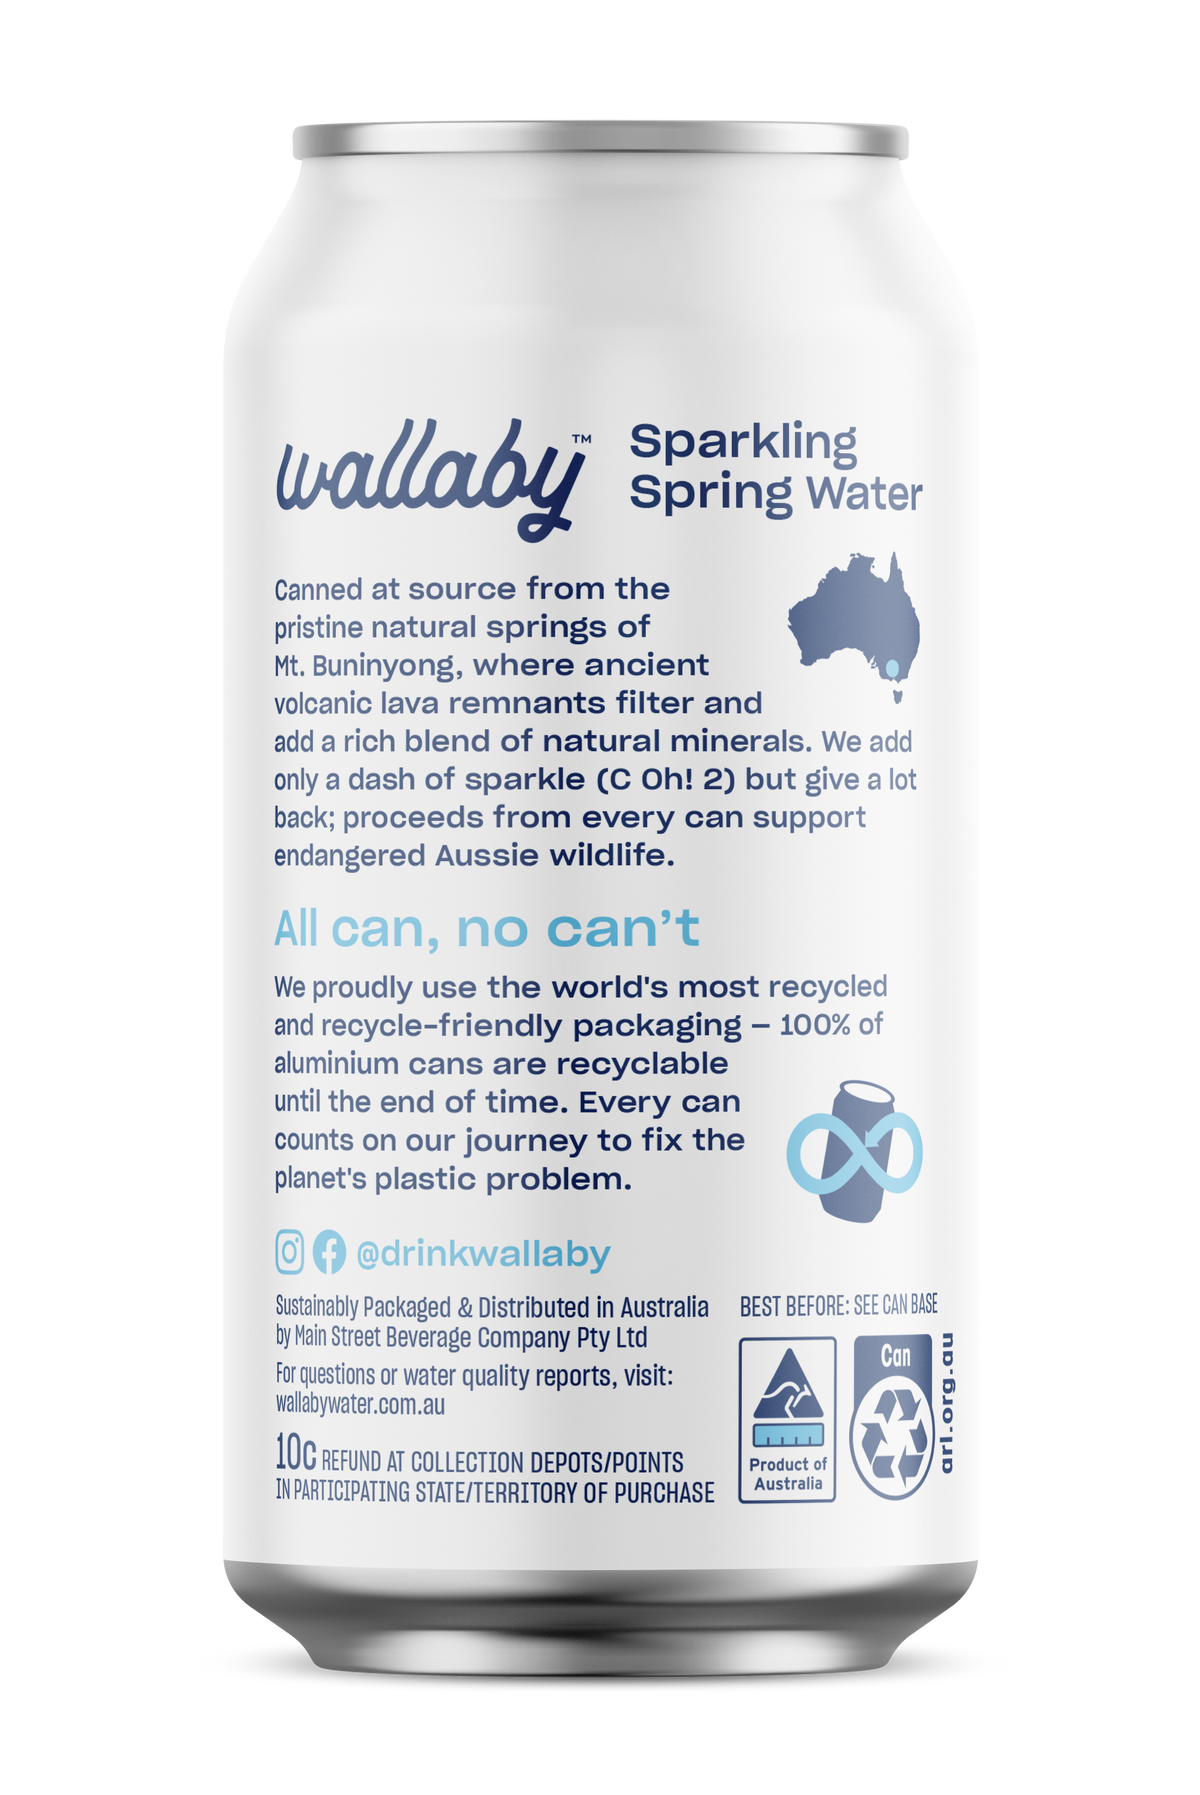 Wallaby Sparkling Canned Water